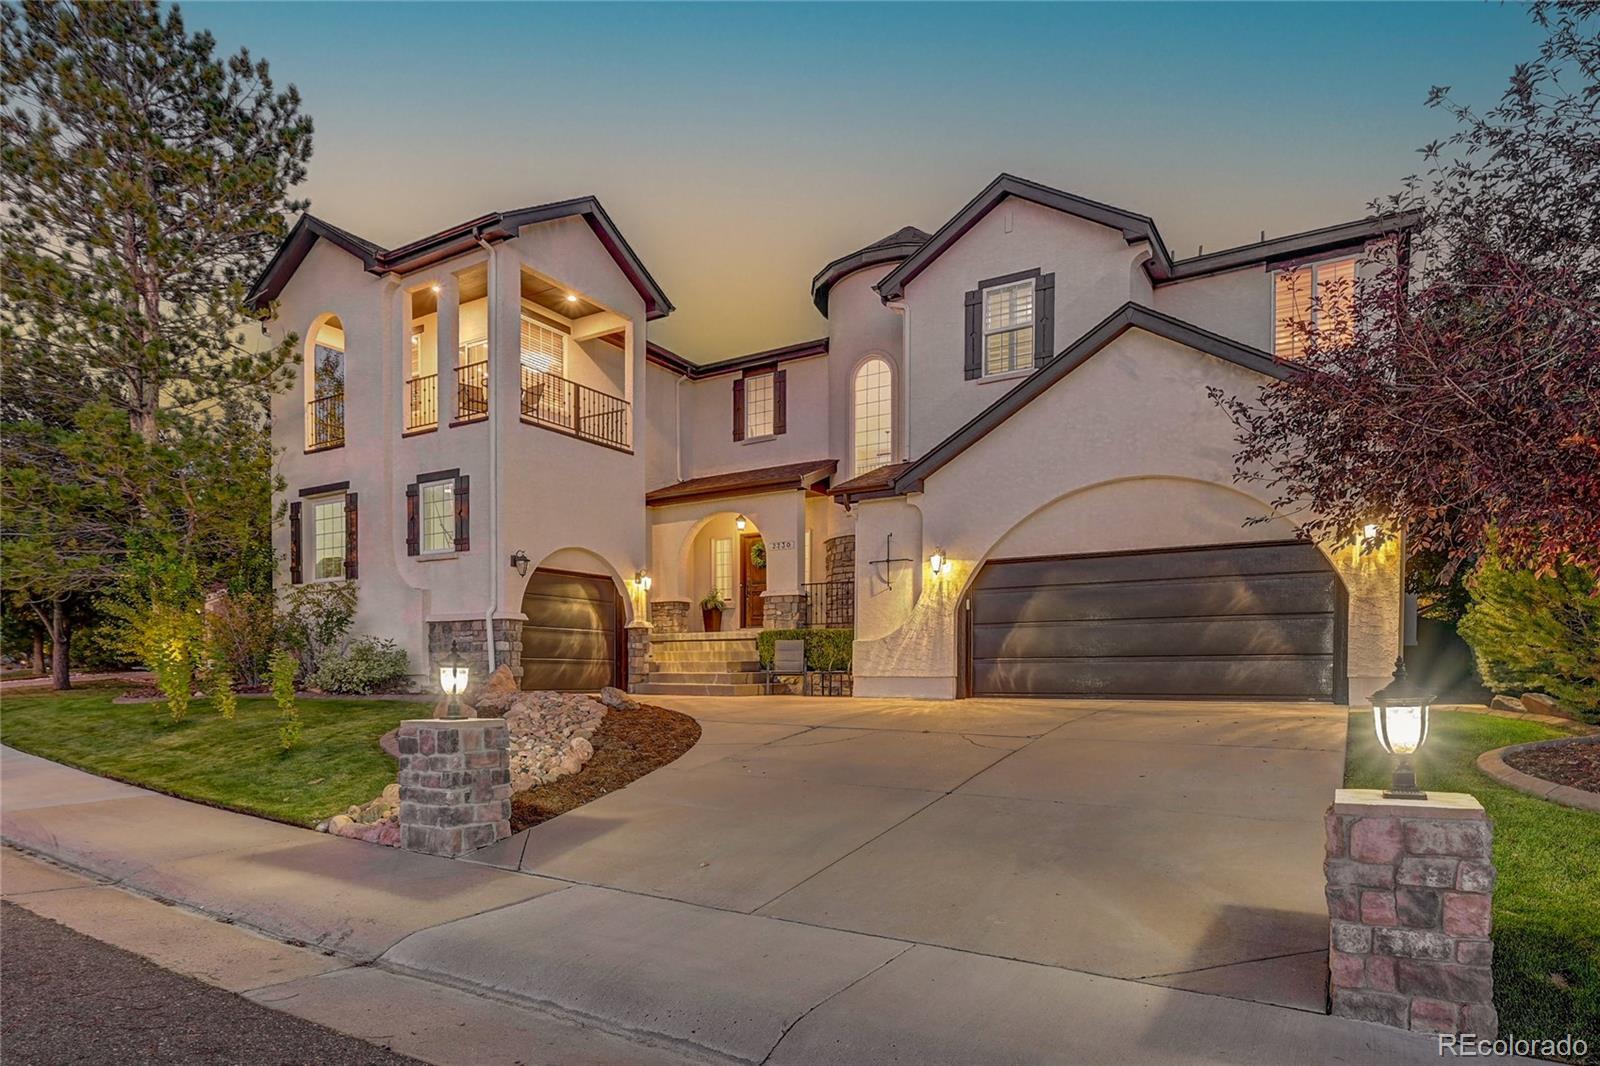 Photo one of 2730 Timberchase Trl Highlands Ranch CO 80126 | MLS 7688549